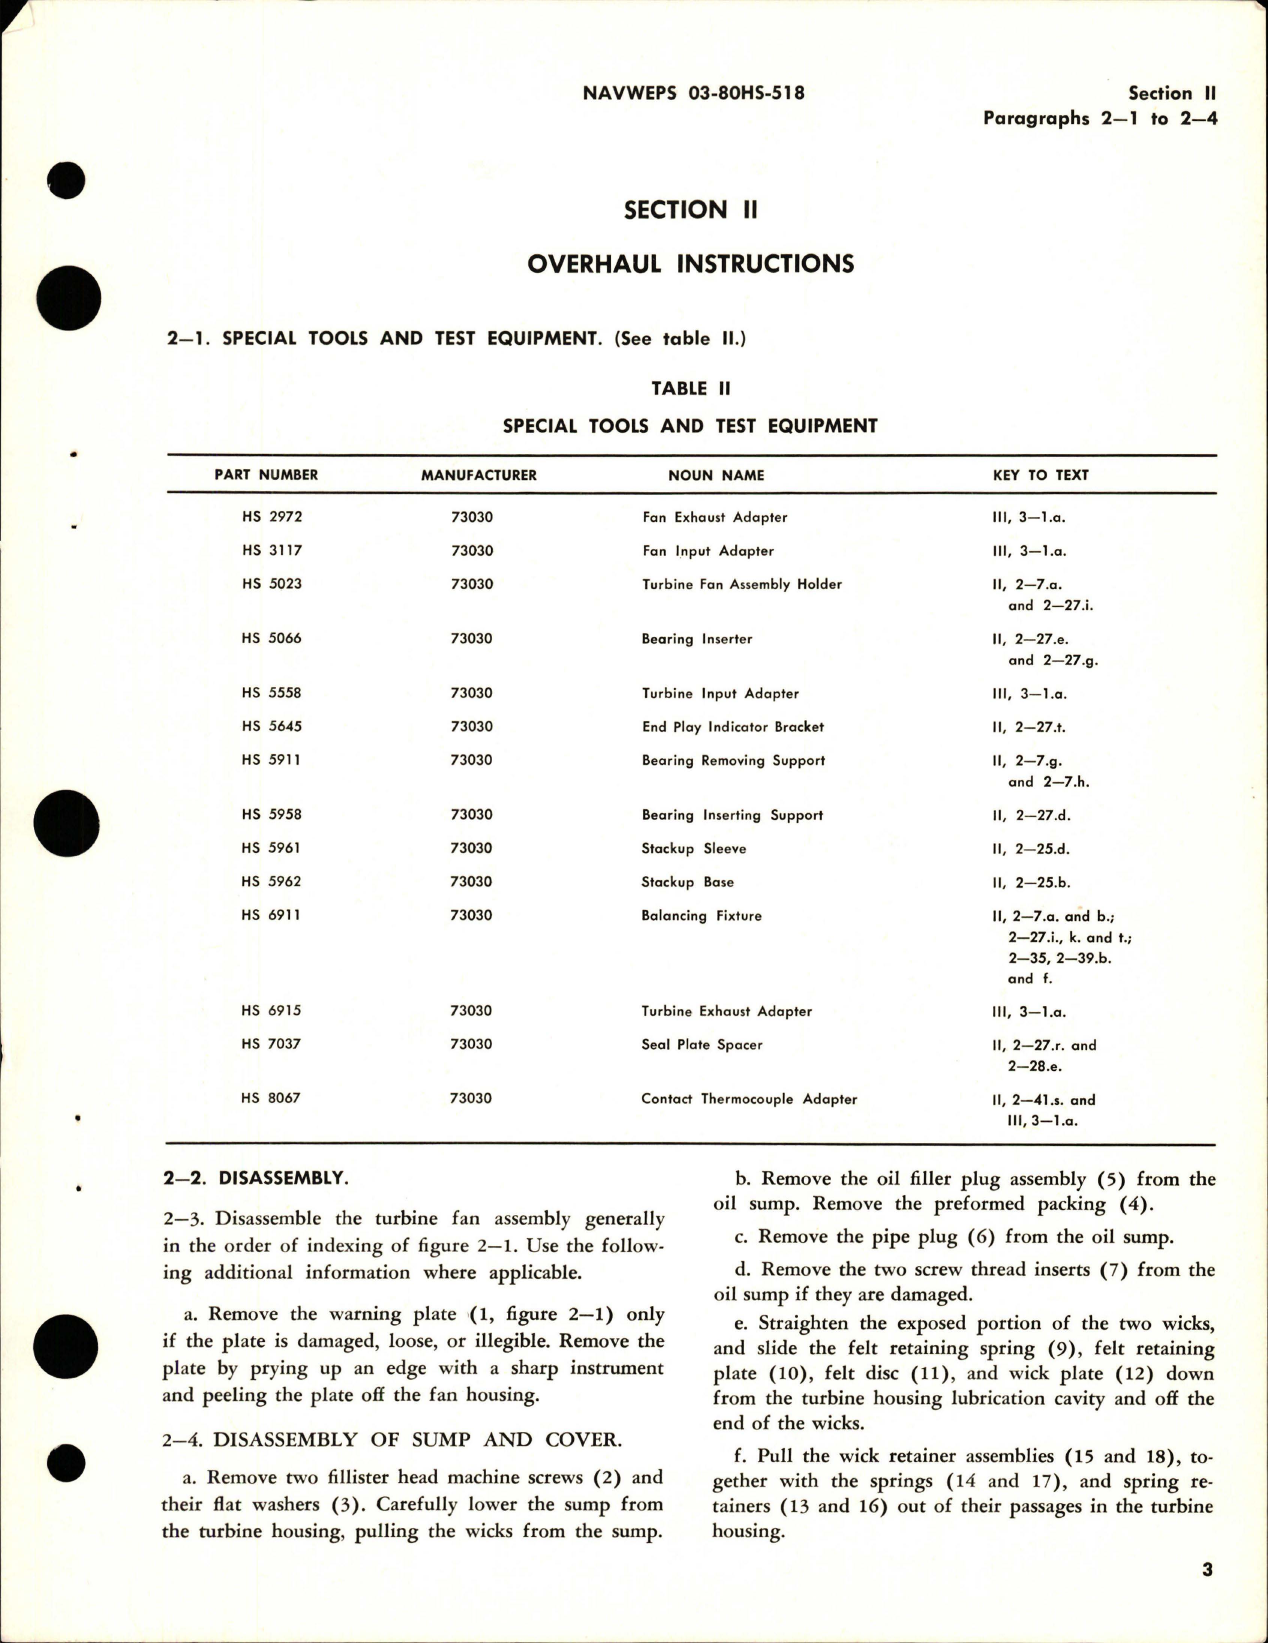 Sample page 7 from AirCorps Library document: Overhaul Instructions for Turbine Fan Assembly - 542970-1 and 542970-2